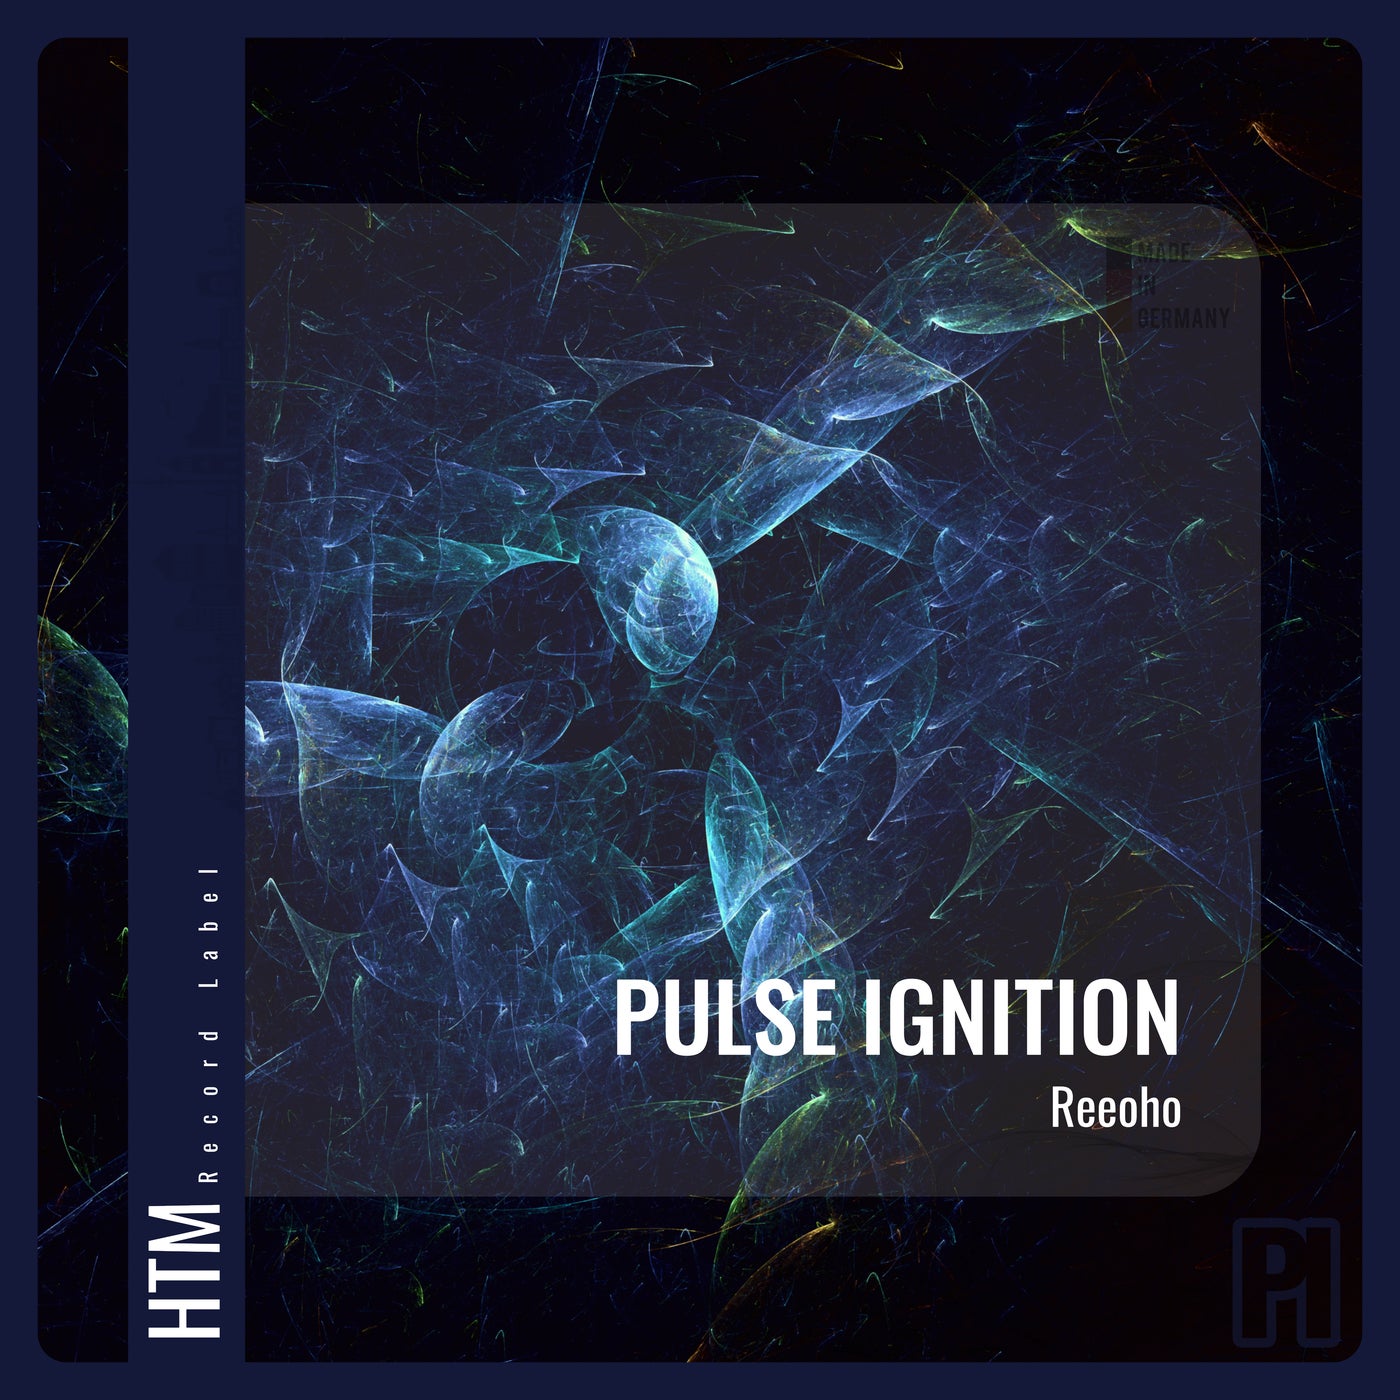 Pulse Ignition